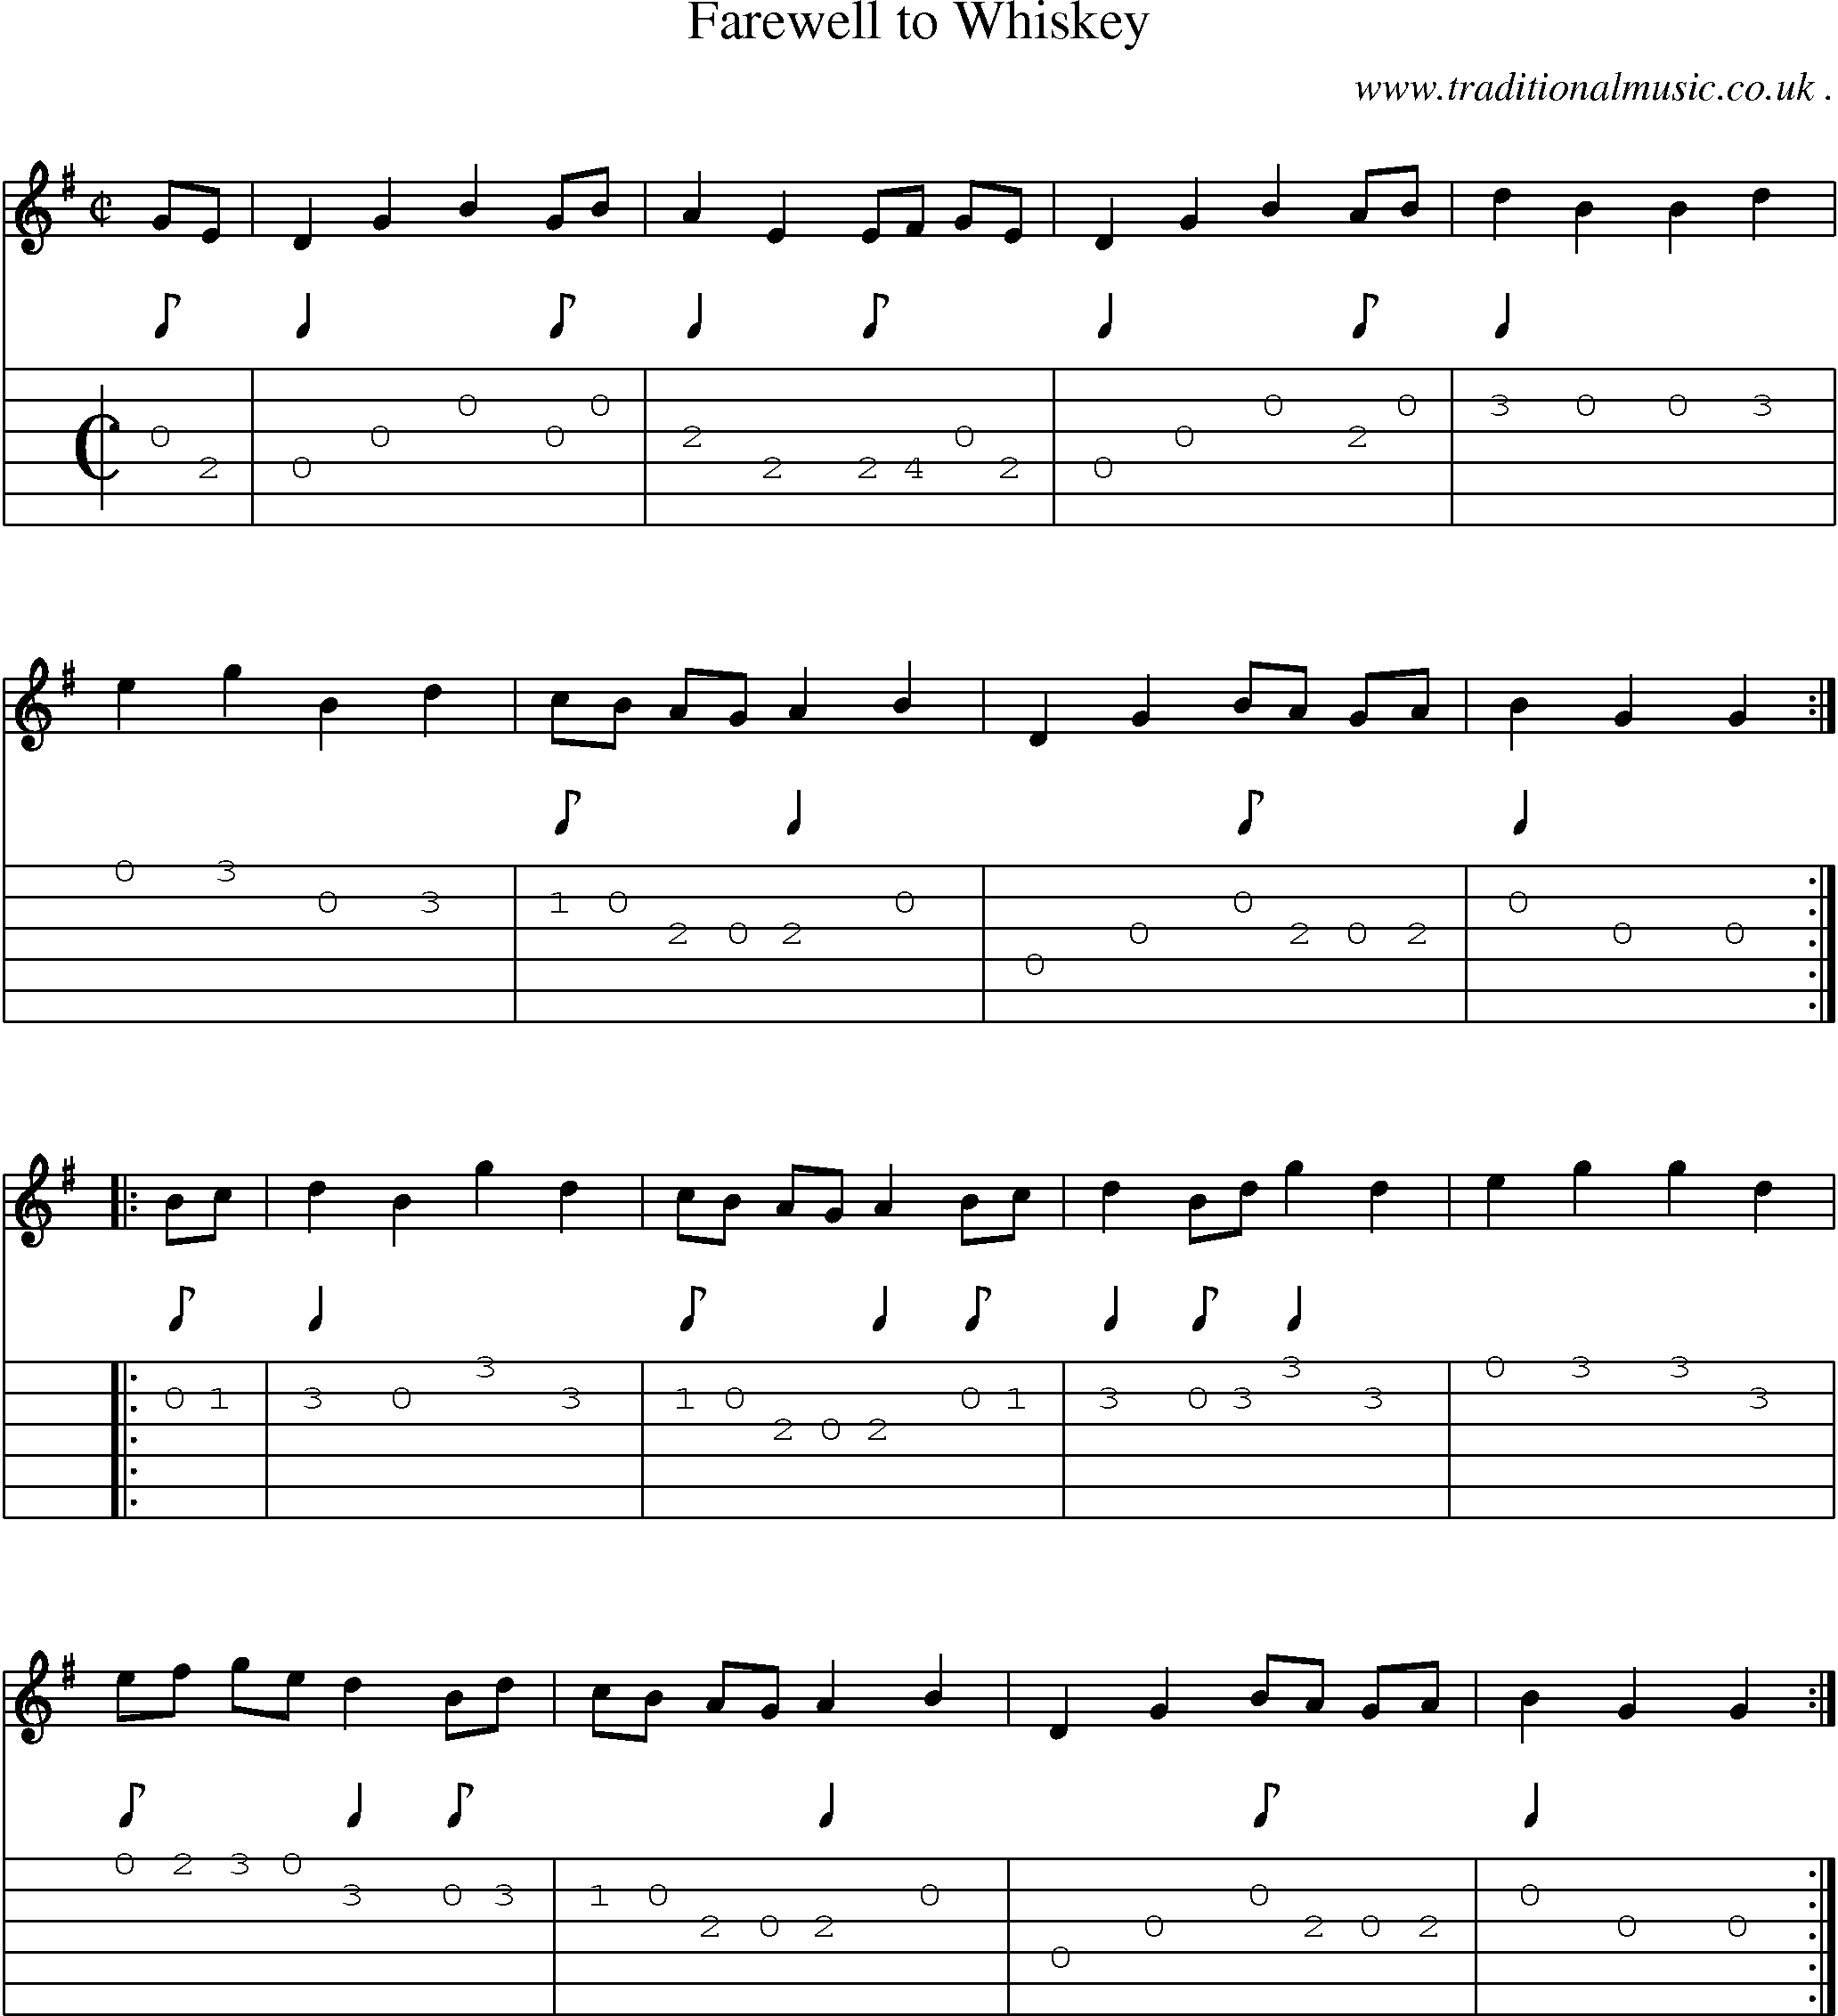 Sheet-music  score, Chords and Guitar Tabs for Farewell To Whiskey